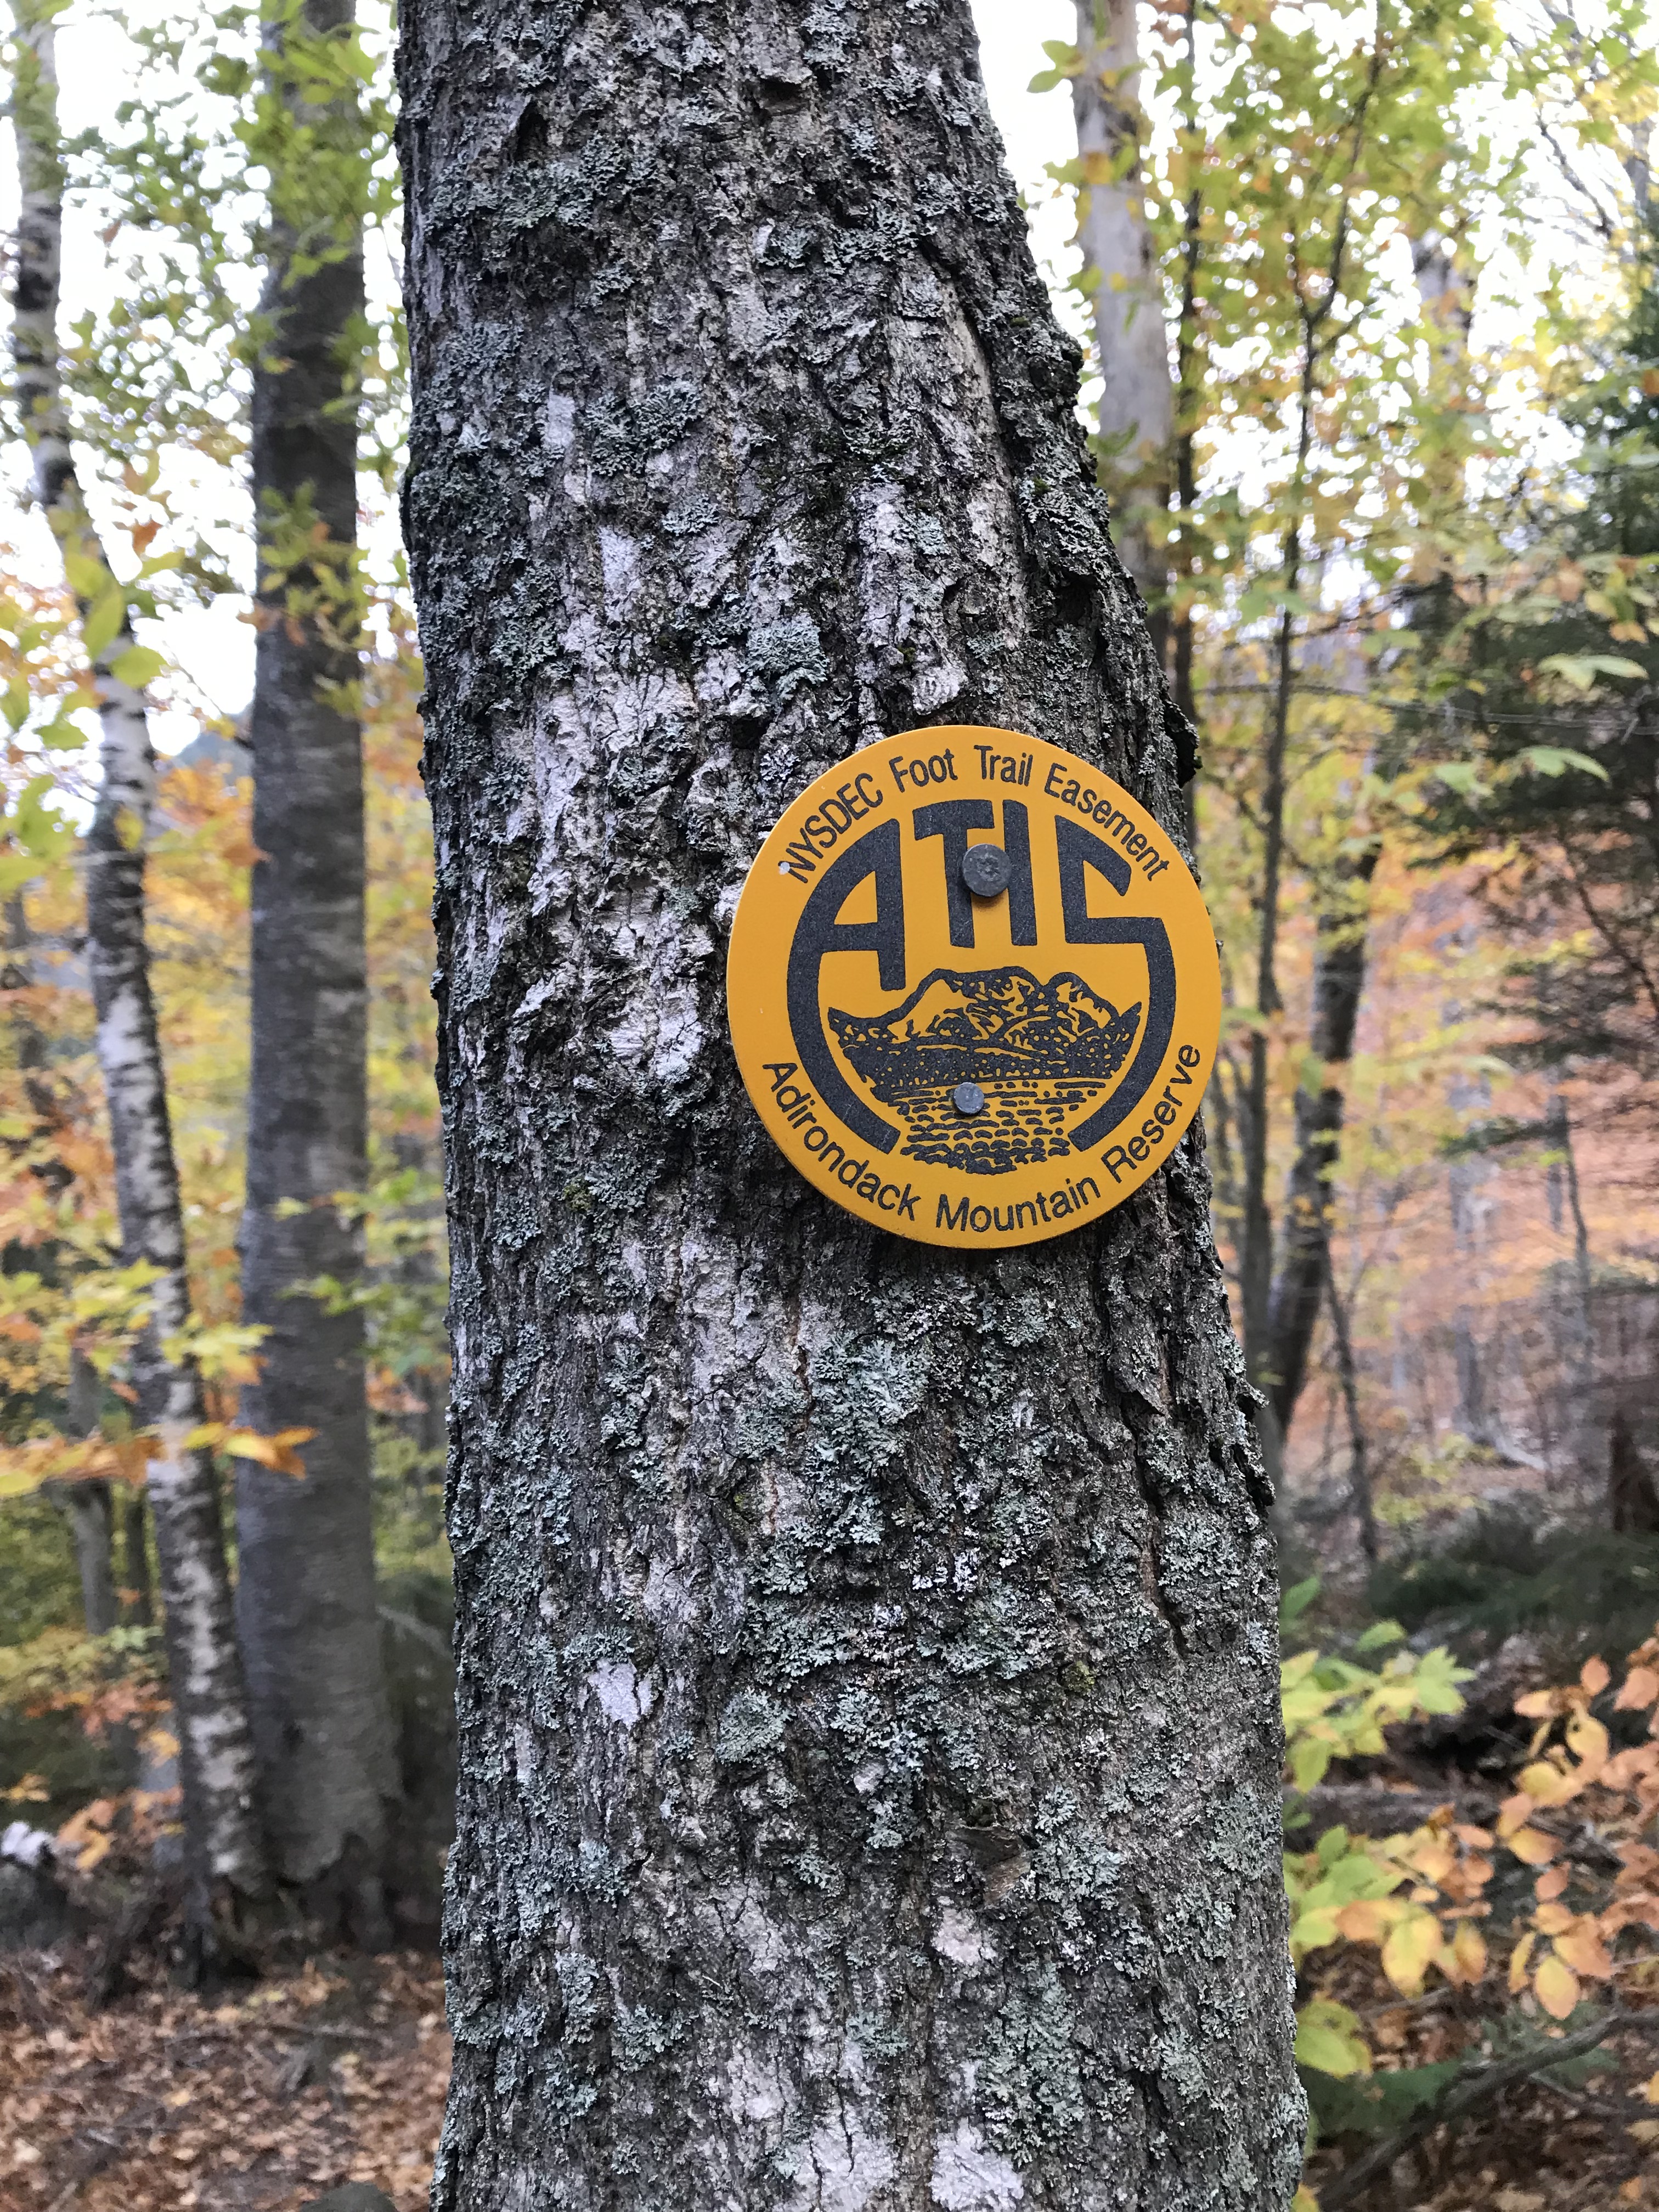 Trail markers along Sawteeth Mountain scenic route